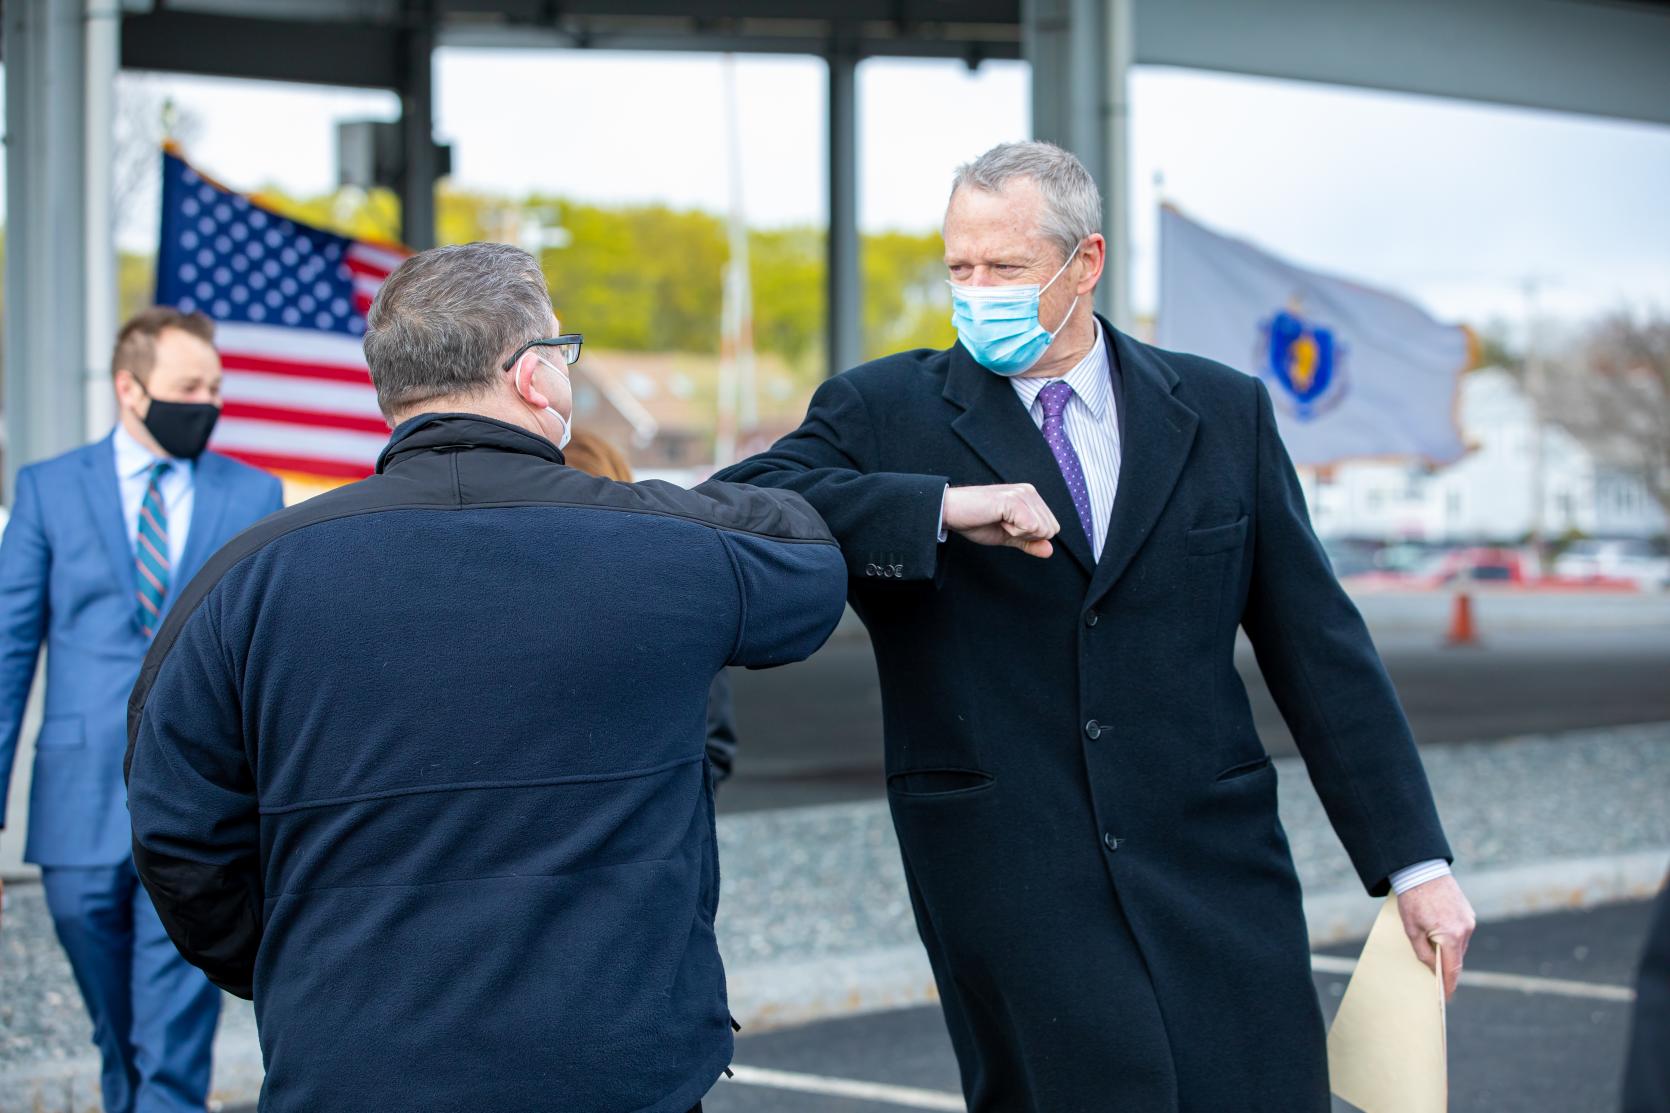 Governor Baker Signs Executive Order to Reduce Greenhouse Gas Emissions at State Facilities